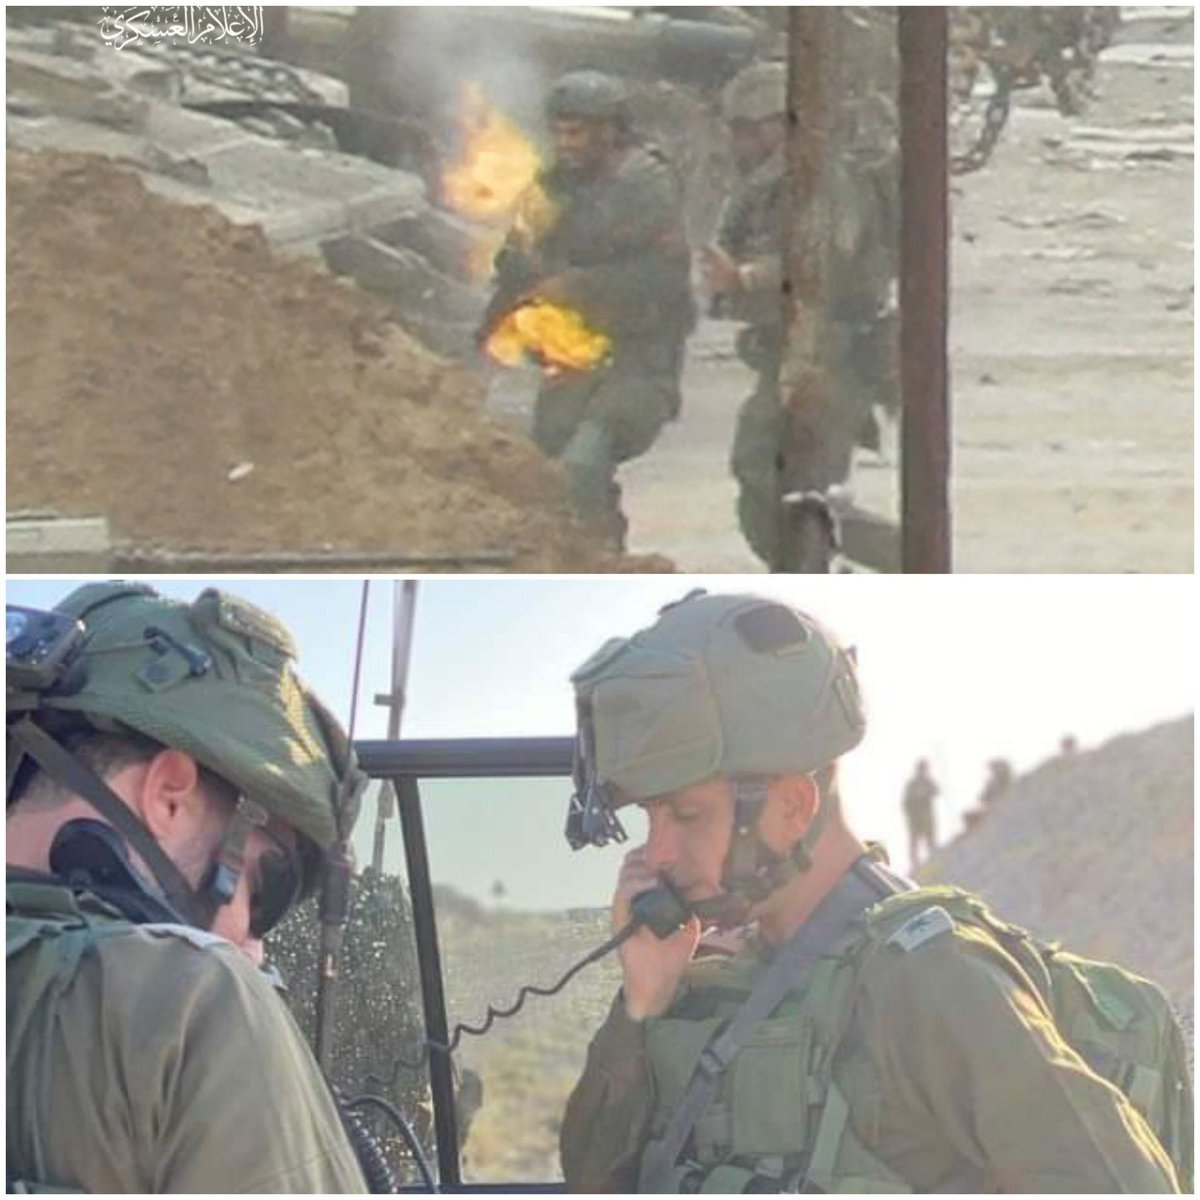 #Destruction :

Deputy Superintendent of the Defense System - Brigadier General Yogev Bar Sheshet was the one who was seriously injured by the sniper's bullet.

If he survives death, he will live his life with a pelvic injury.